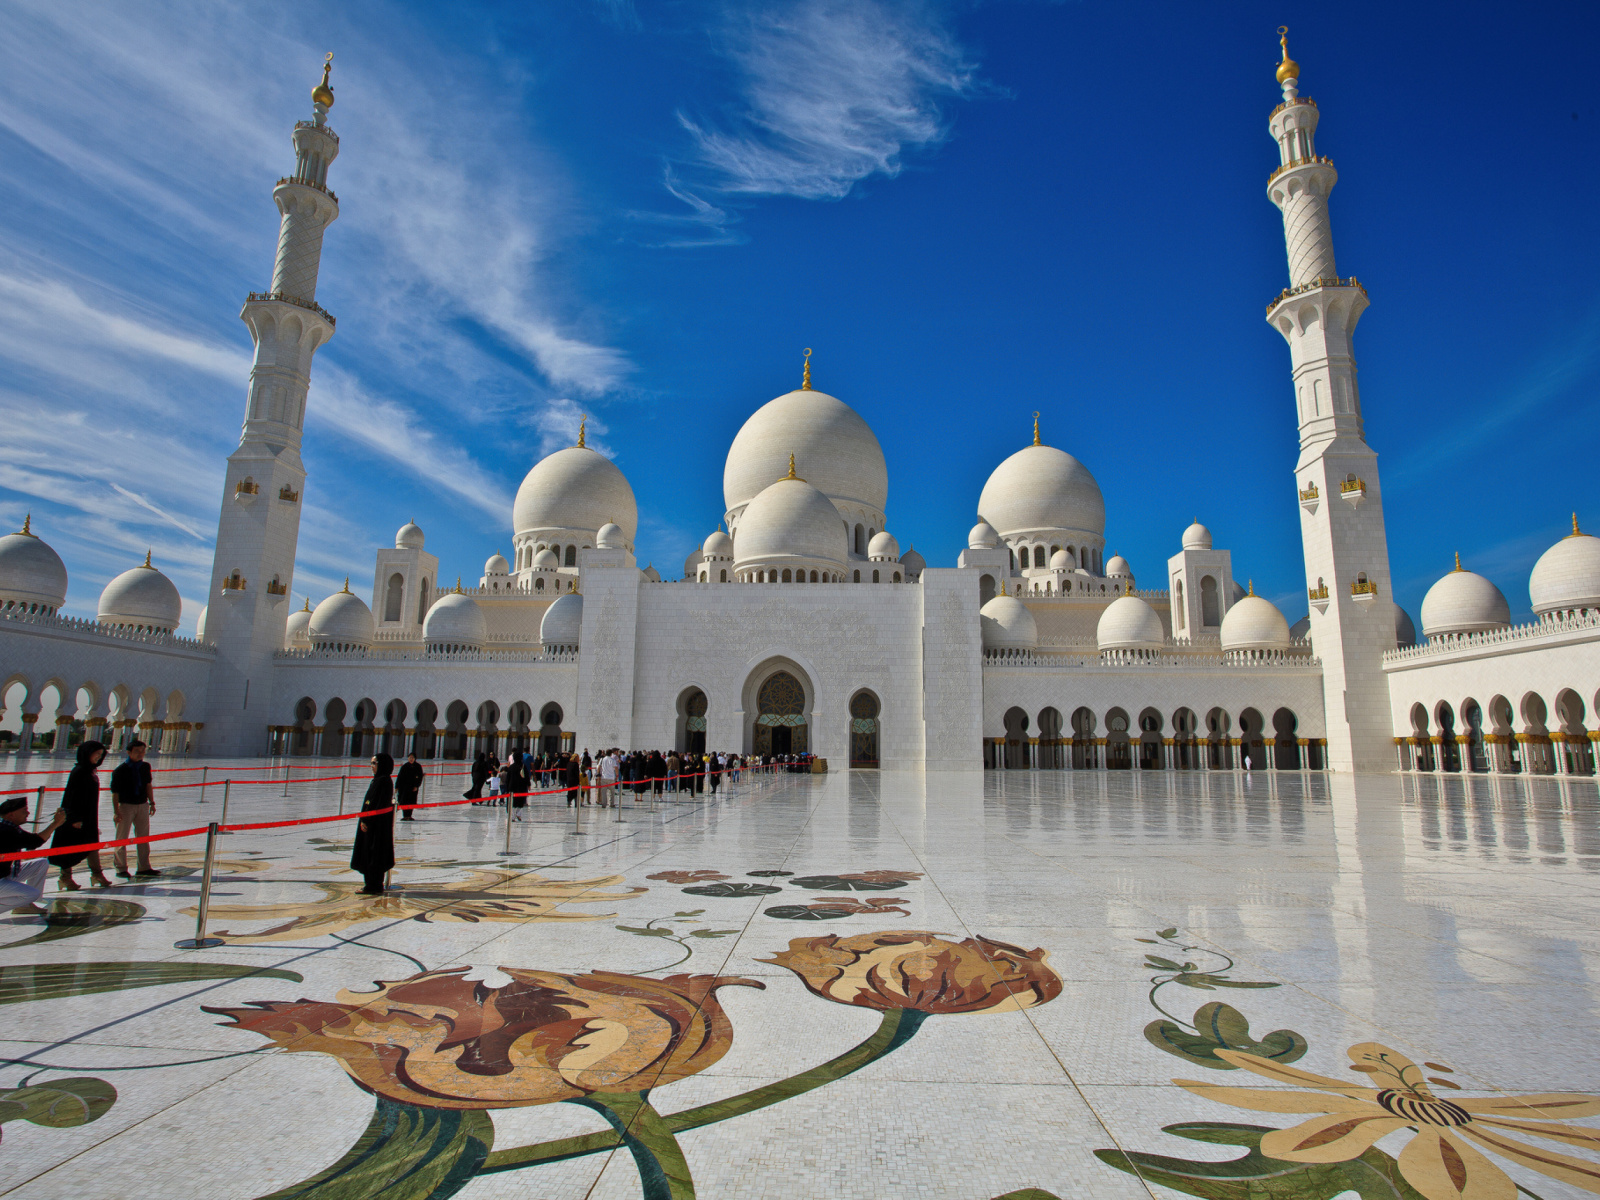 Sheikh Zayed Mosque located in Abu Dhabi wallpaper 1600x1200